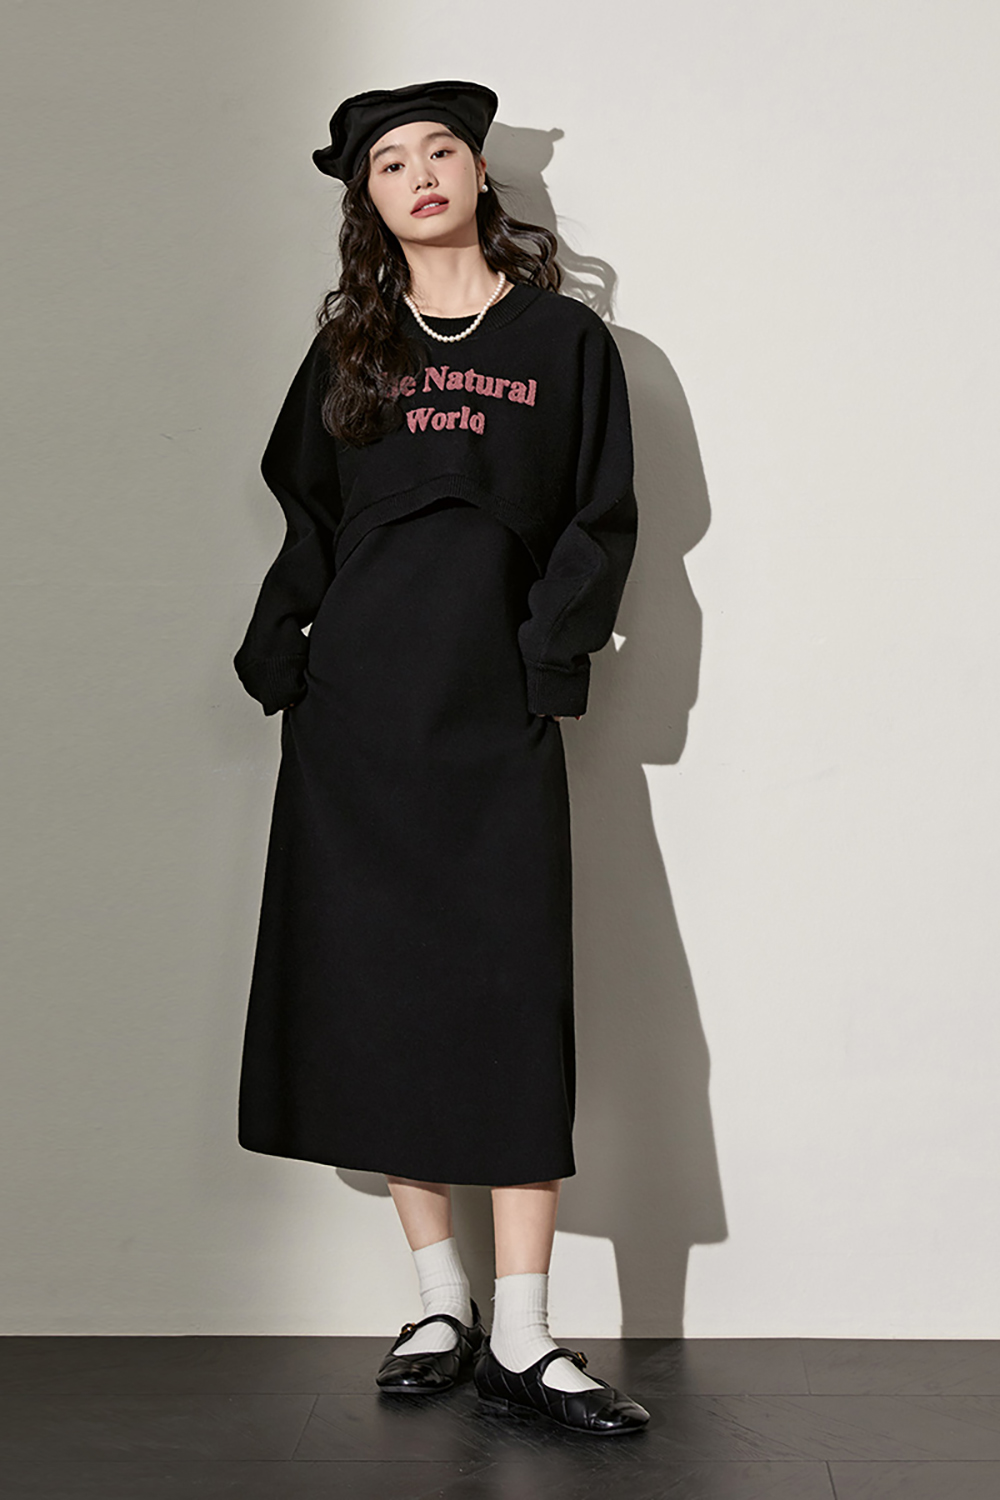 Undershirt dress round neck knit tops two-piece suit 2022 autumn and winter new black dresses